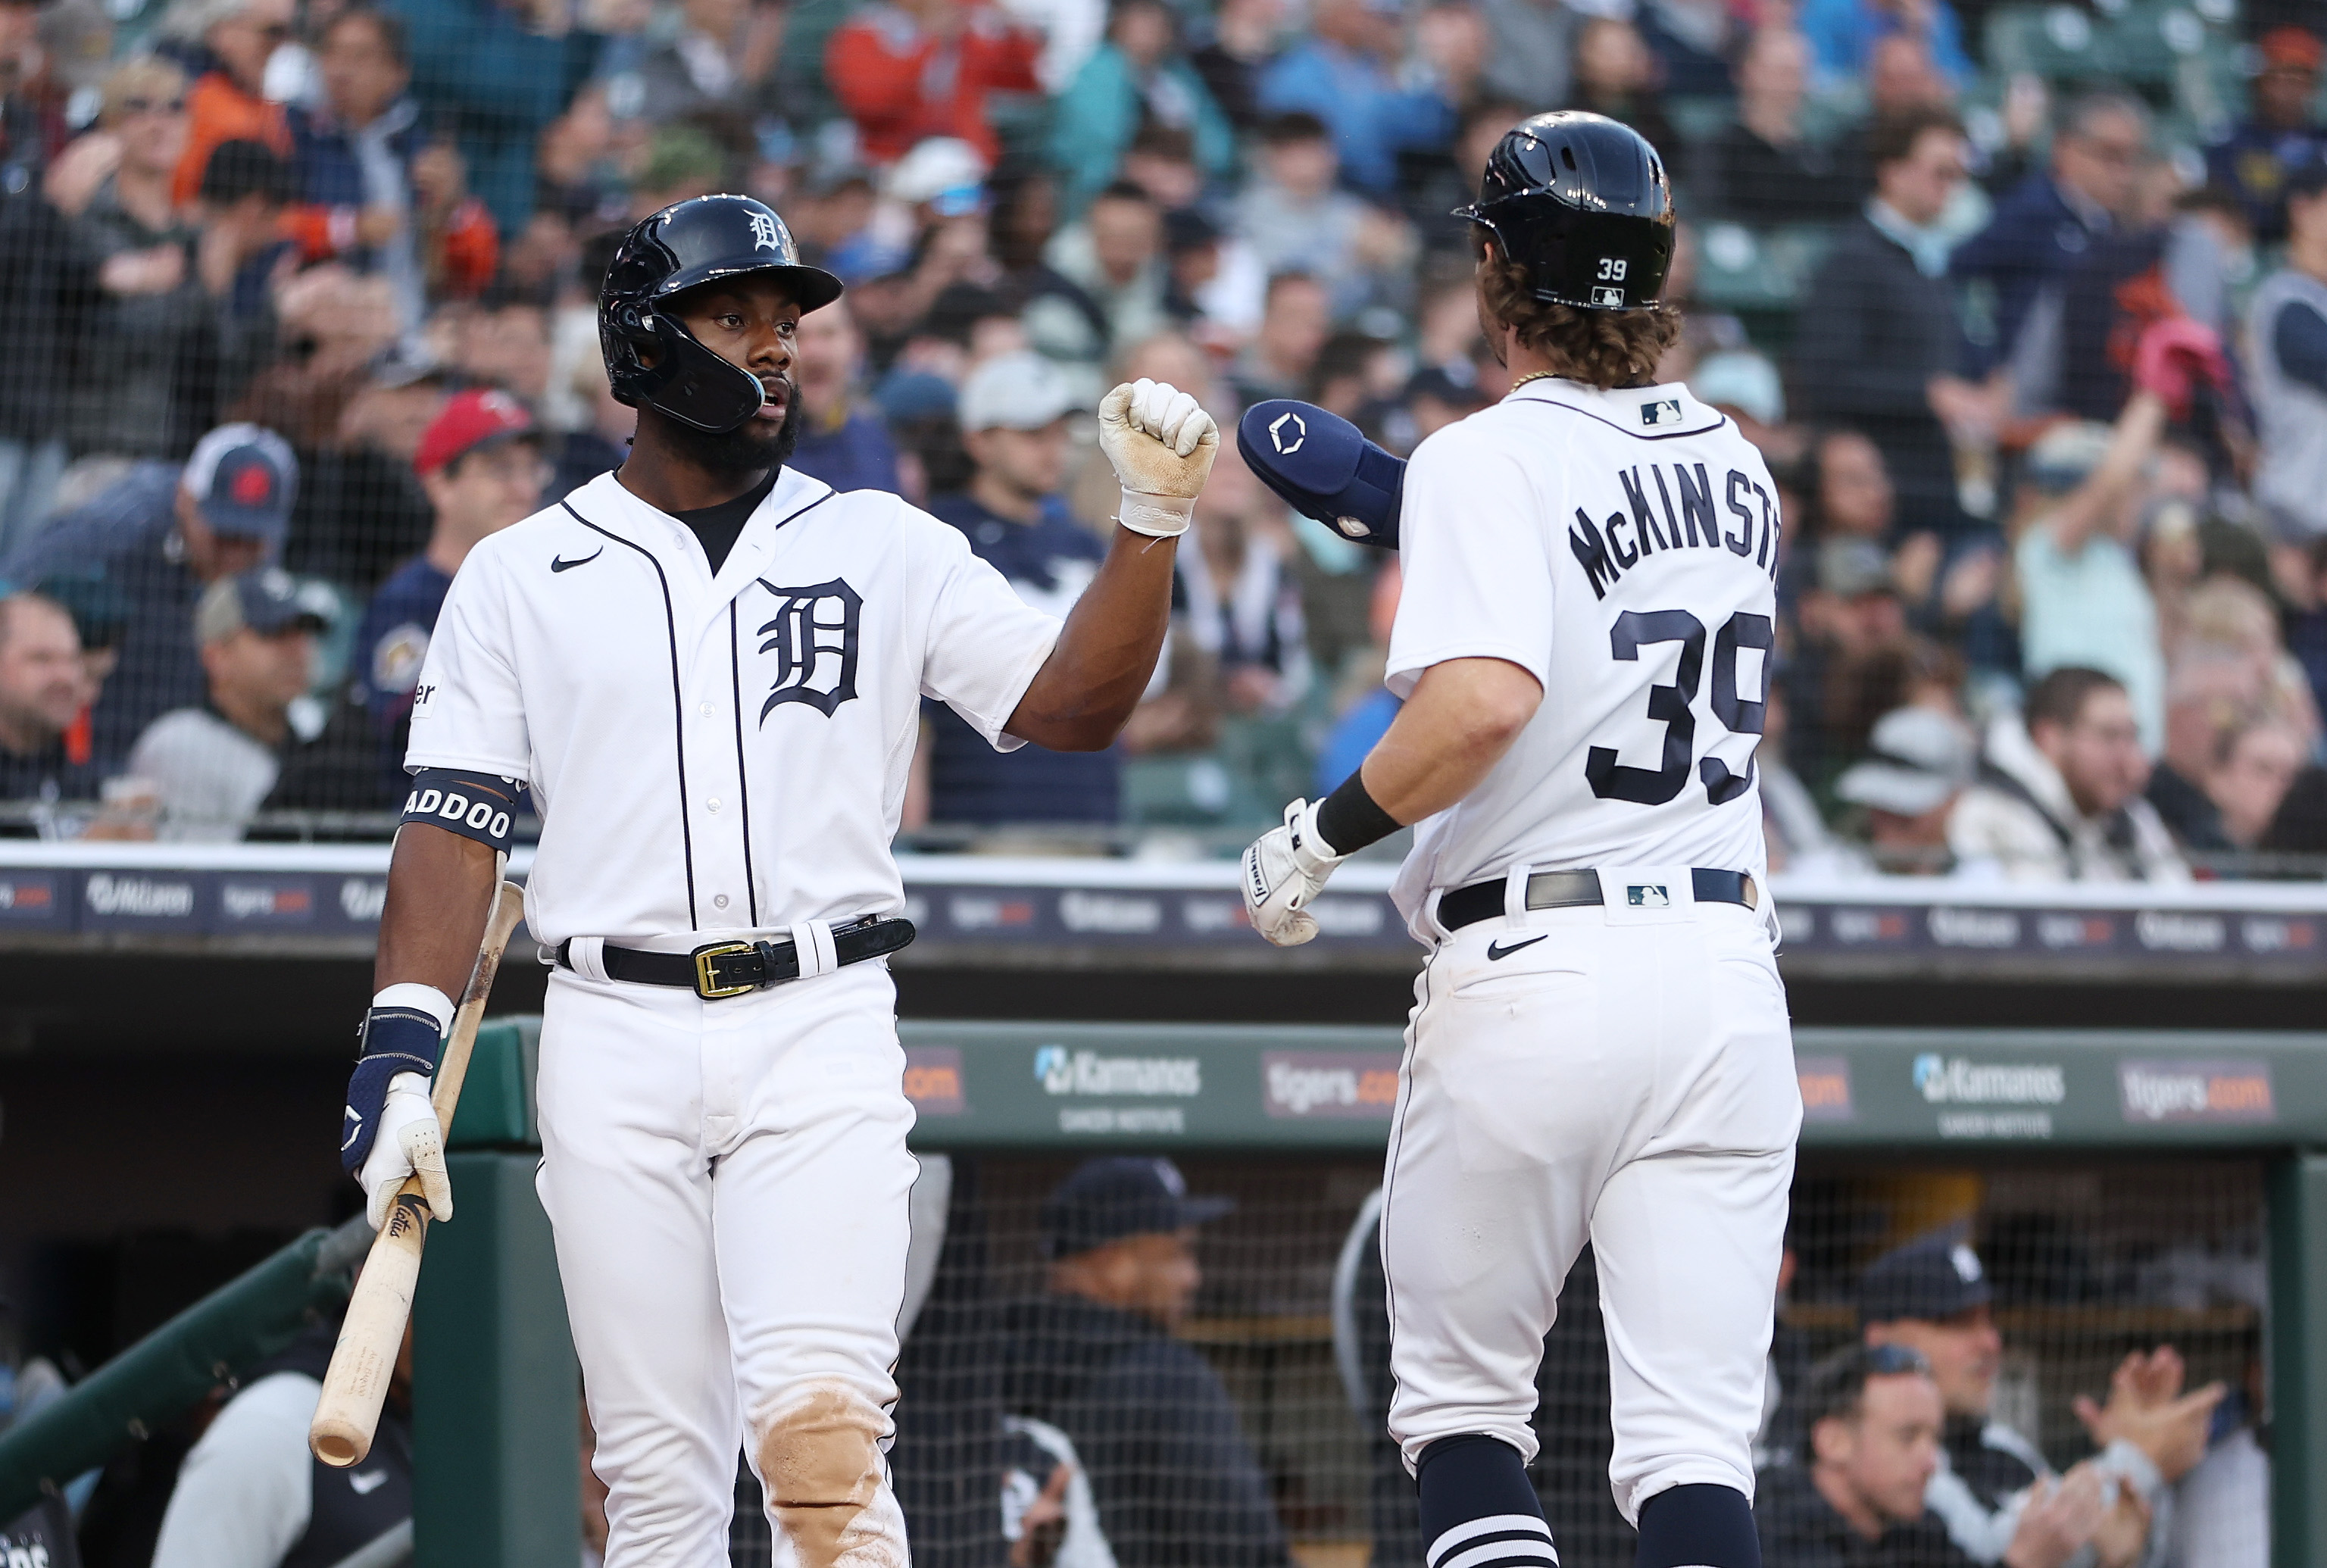 Zach McKinstry's 3 hits lead Detroit Tigers past Chicago White Sox, 7-3